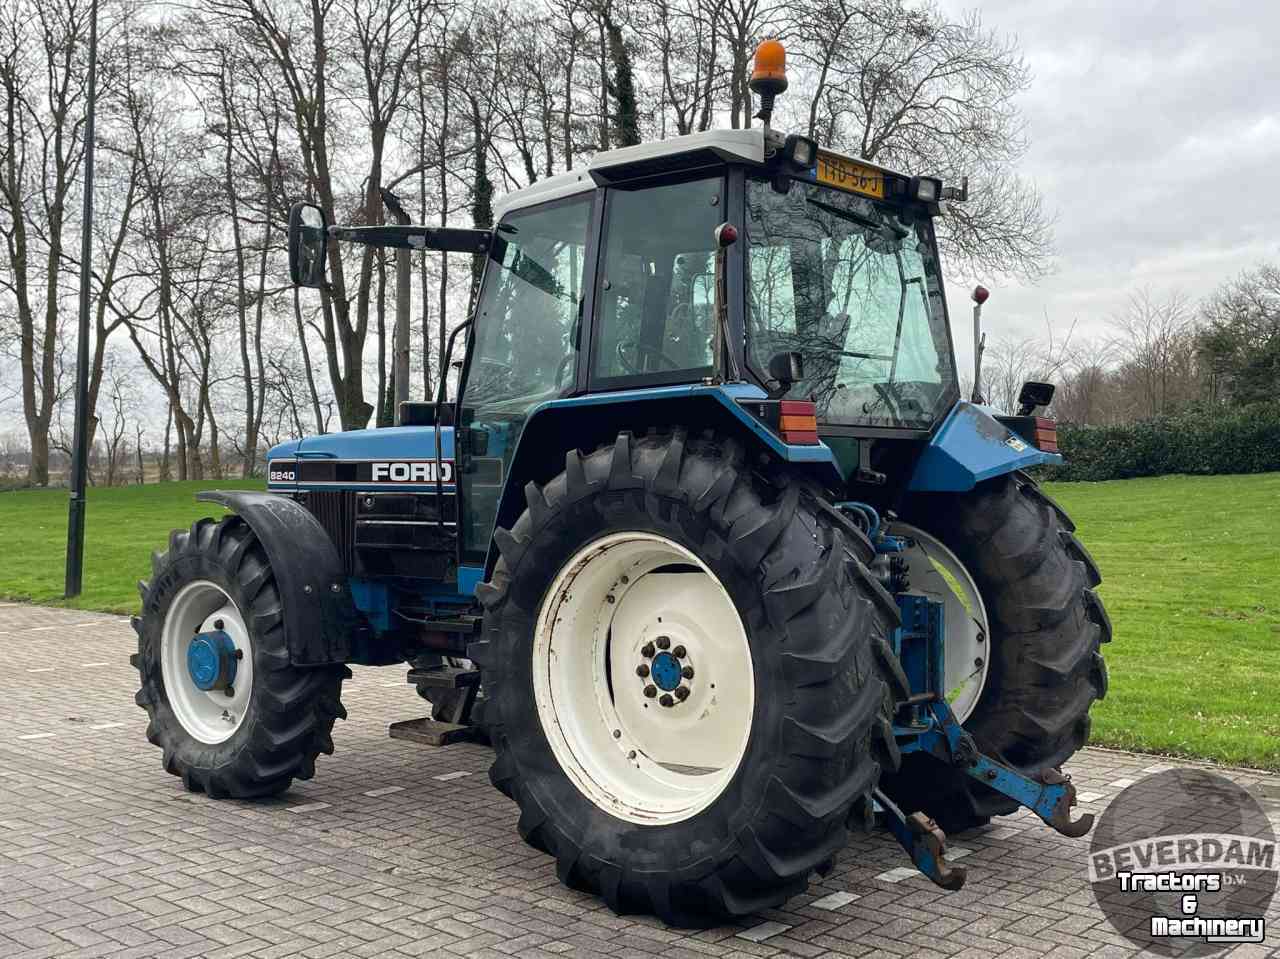 Tractors Ford 8240